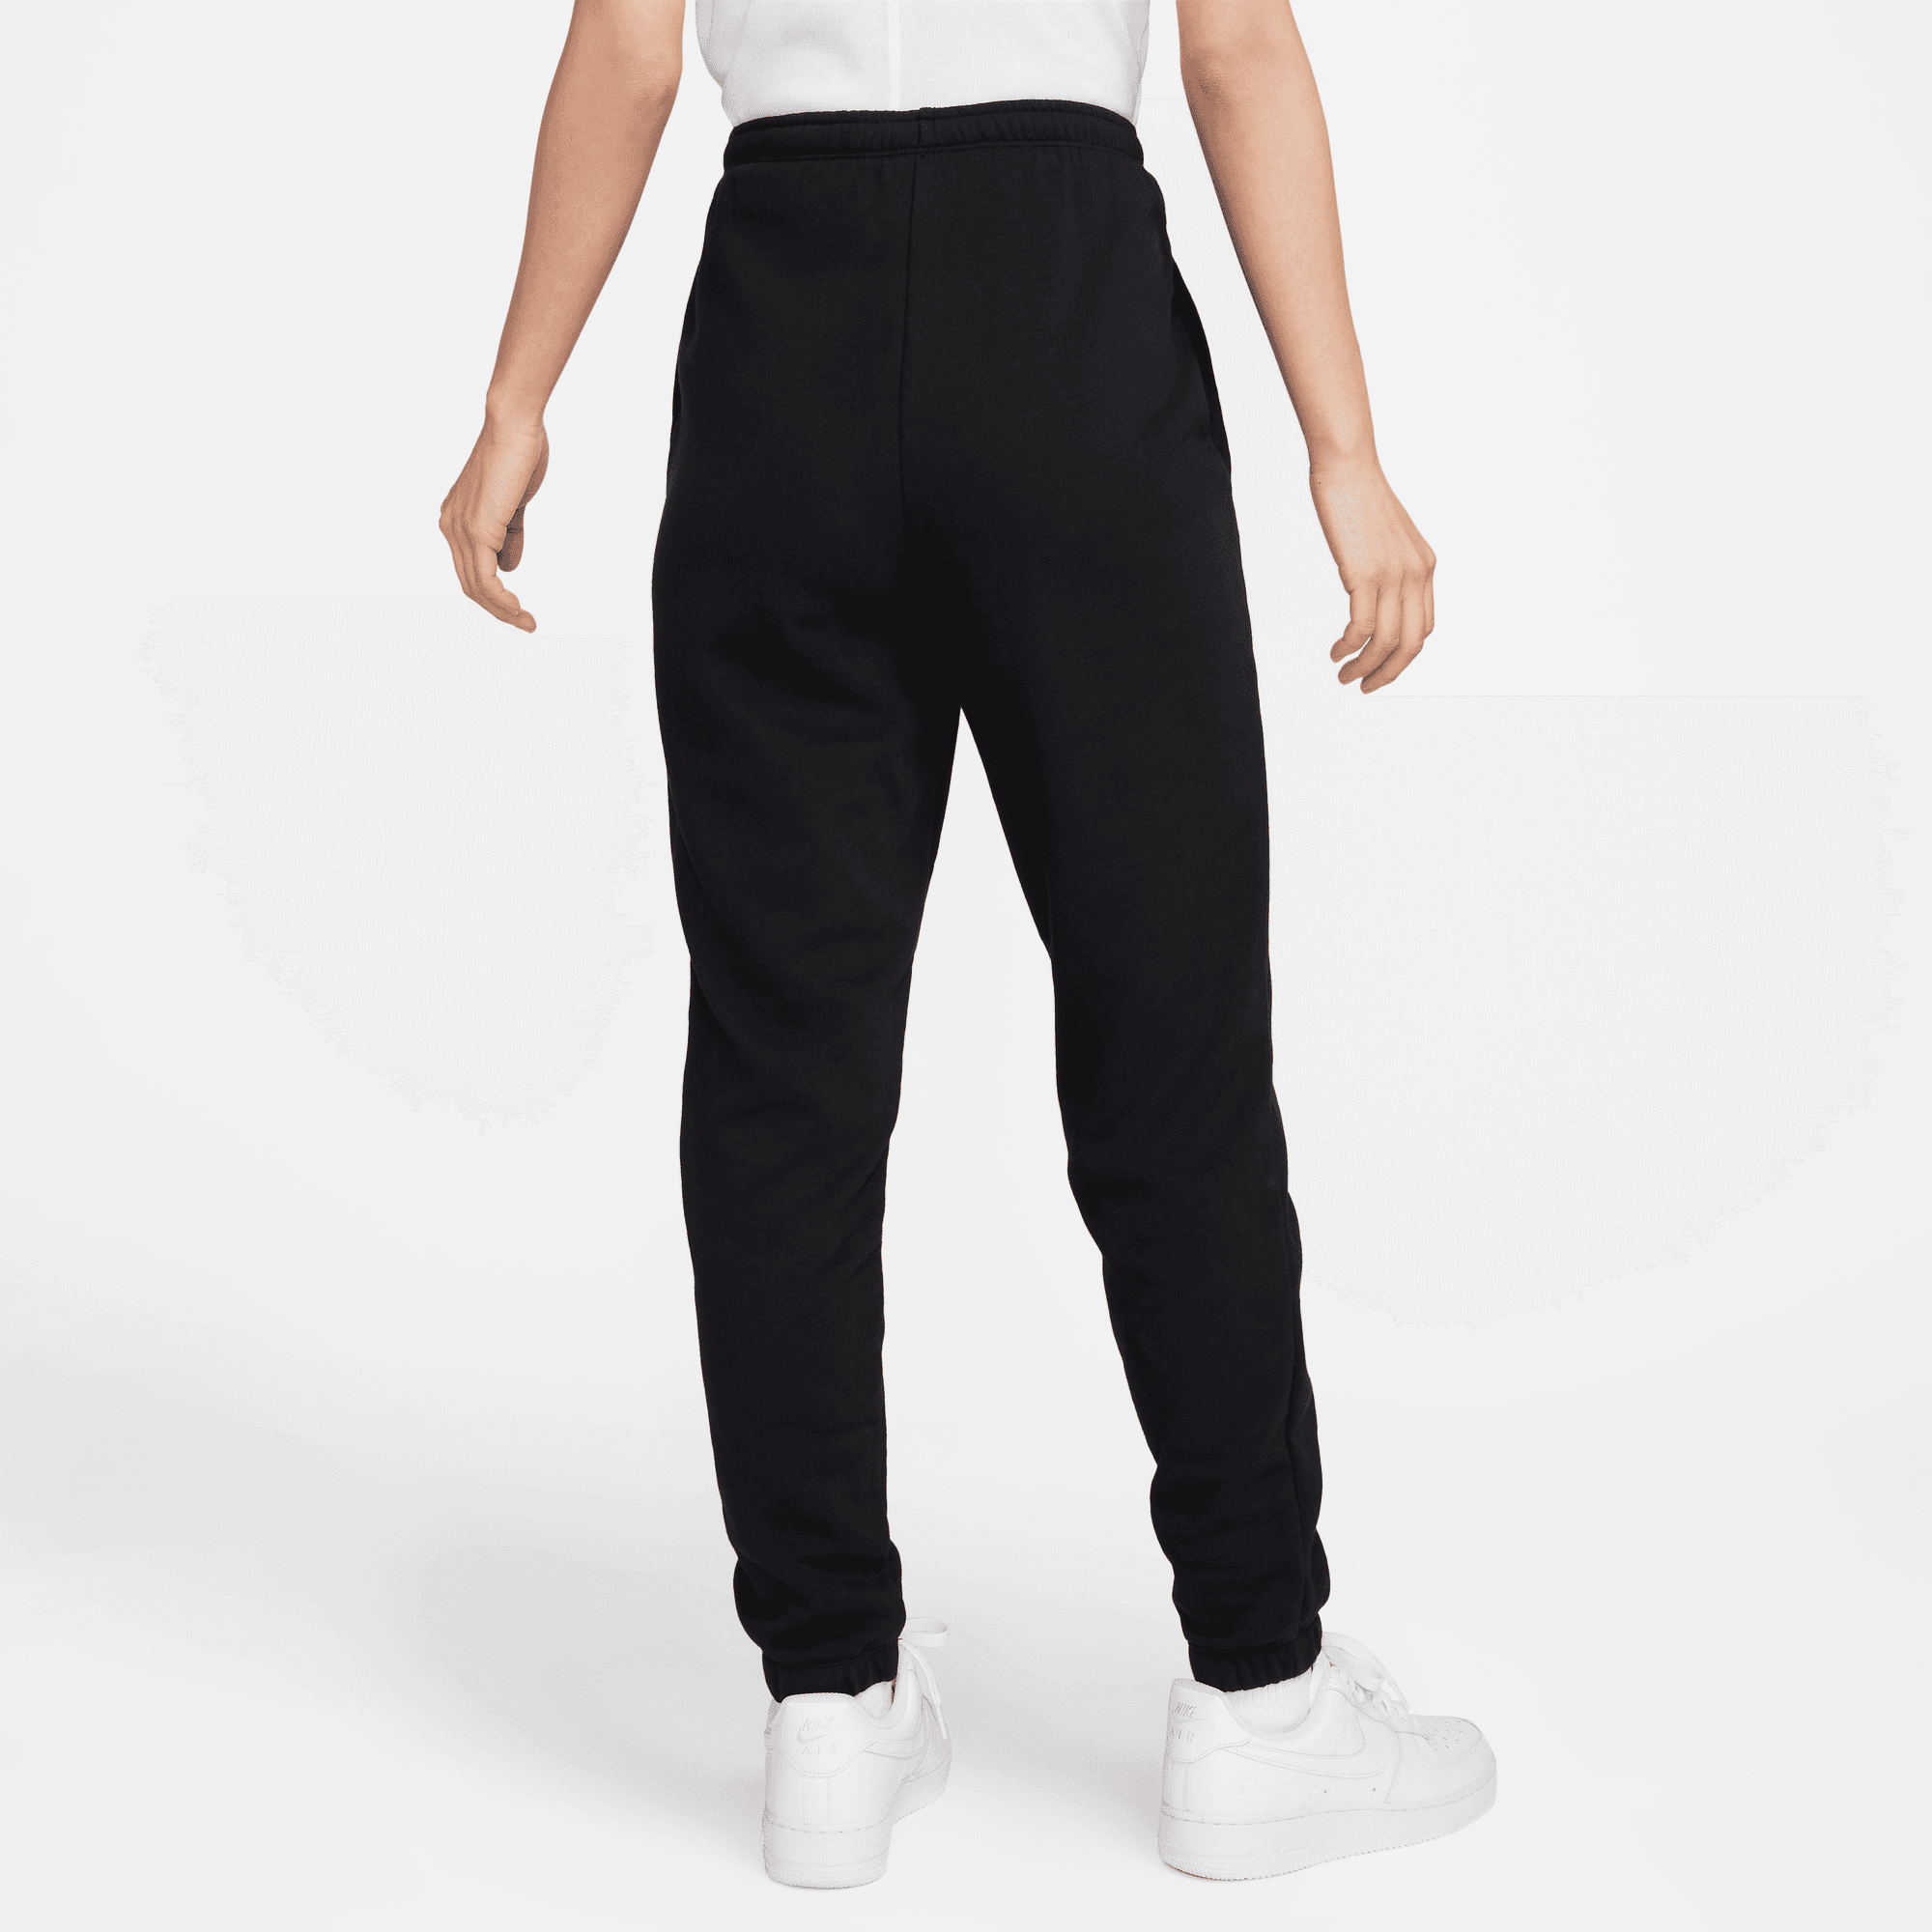 Nike Sportswear Chill Terry Women's High-Waisted Slim 2 French Terry Shorts